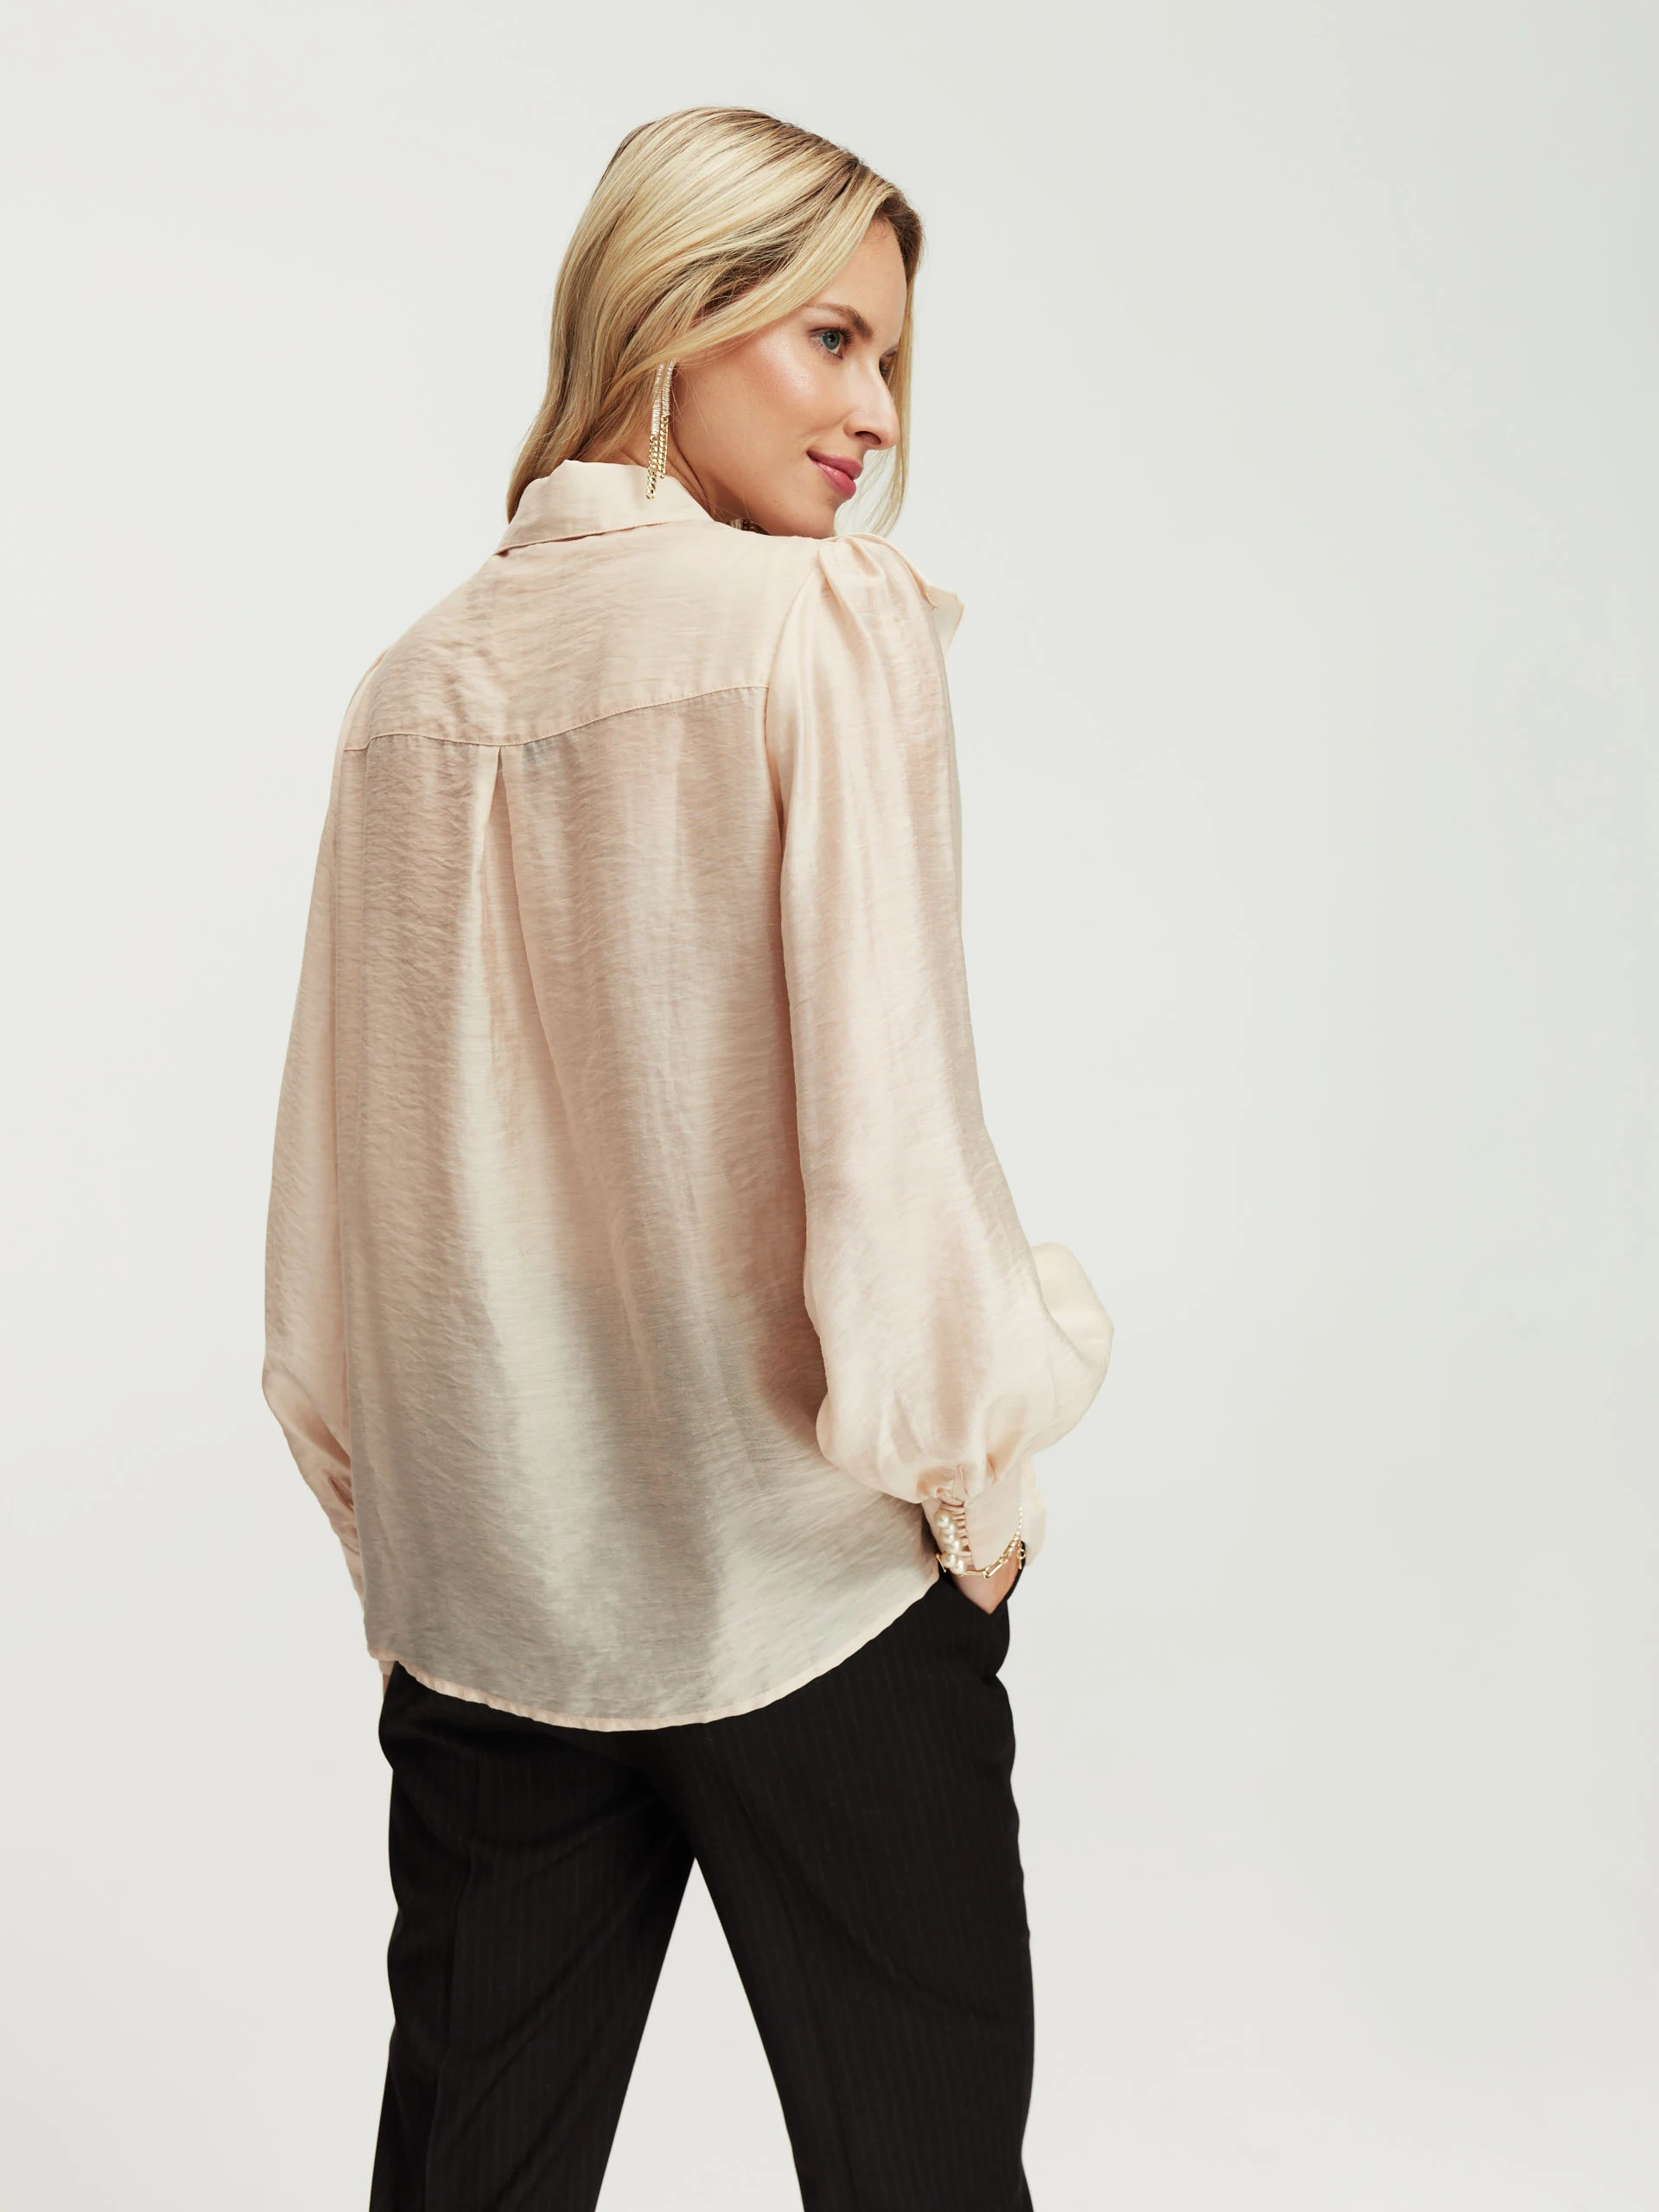 Light color blouse with ruffles